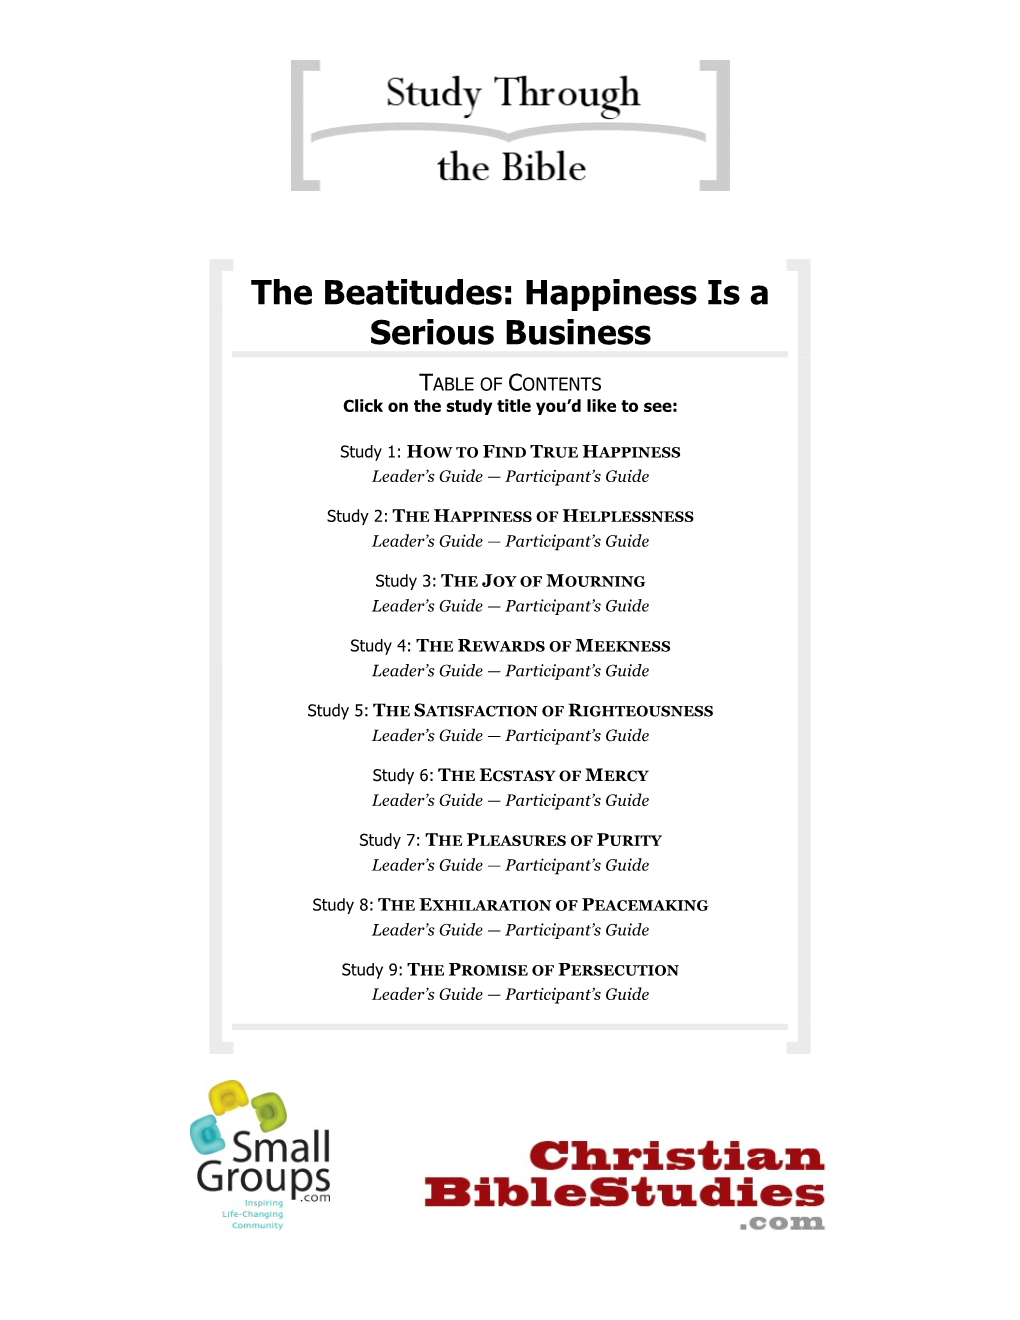 The Beatitudes: Happiness Is a Serious Business - Study 1